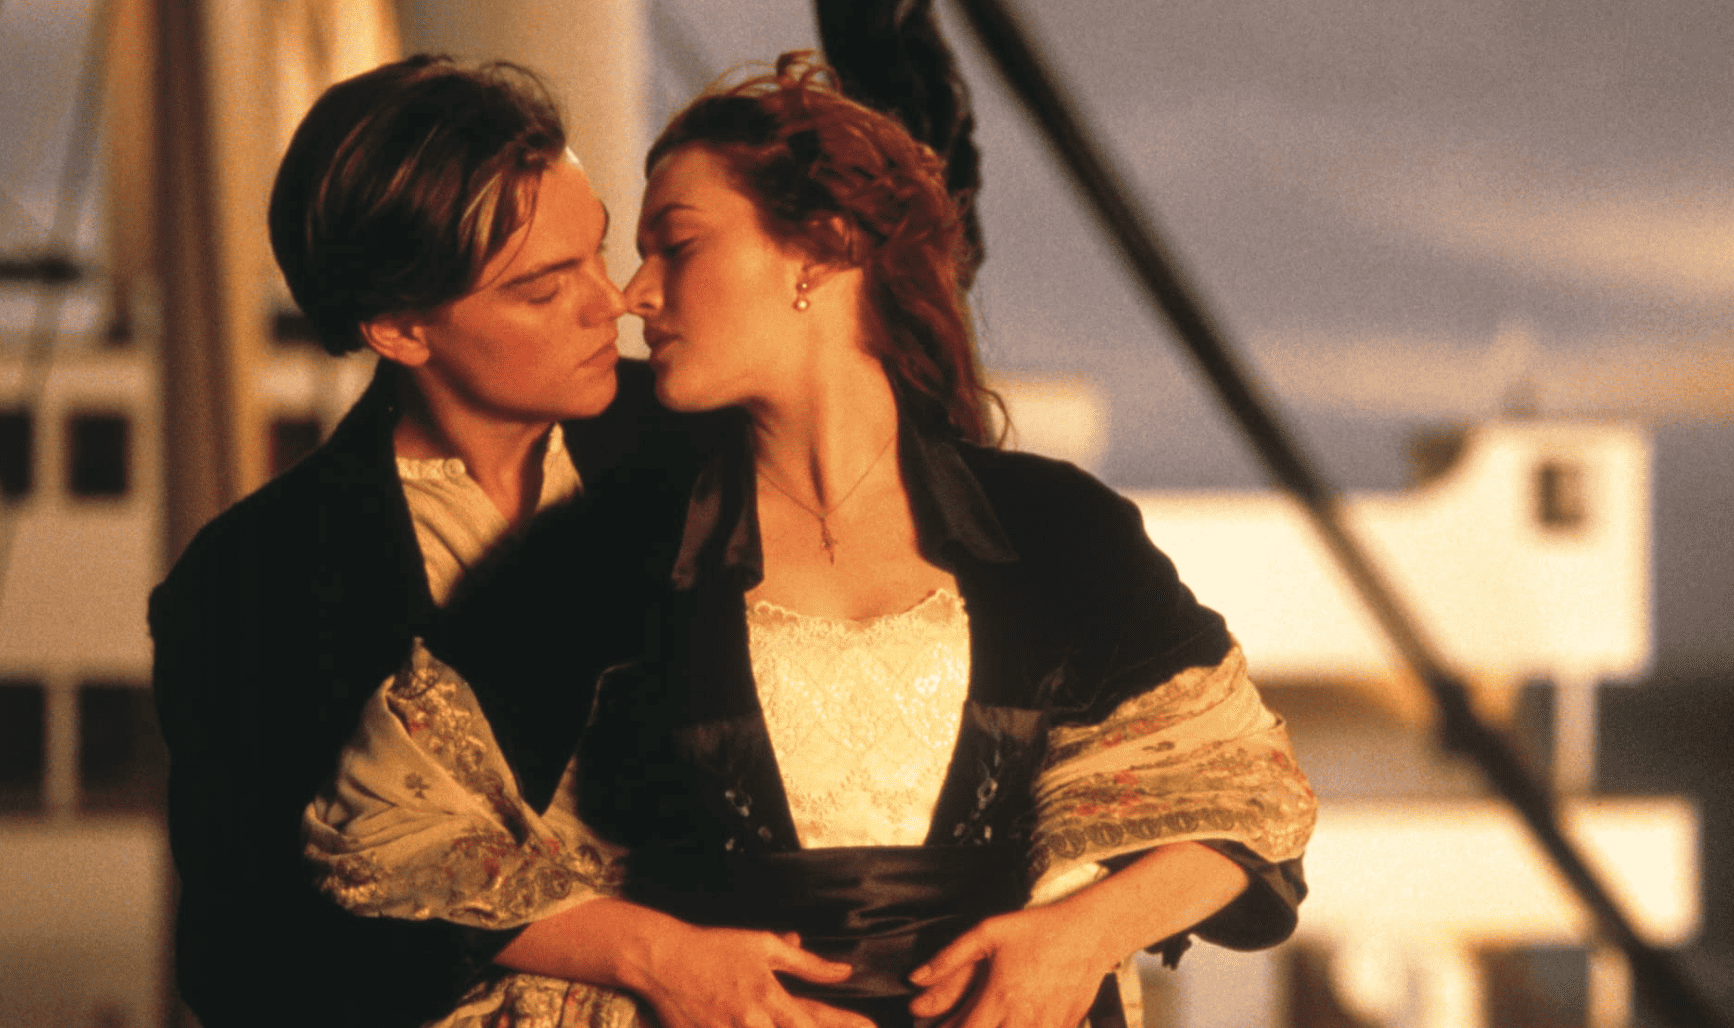 Jack standing behind Rose with his arms around her as they stand on the hull of the boat in this epic image from 20th Century Fox